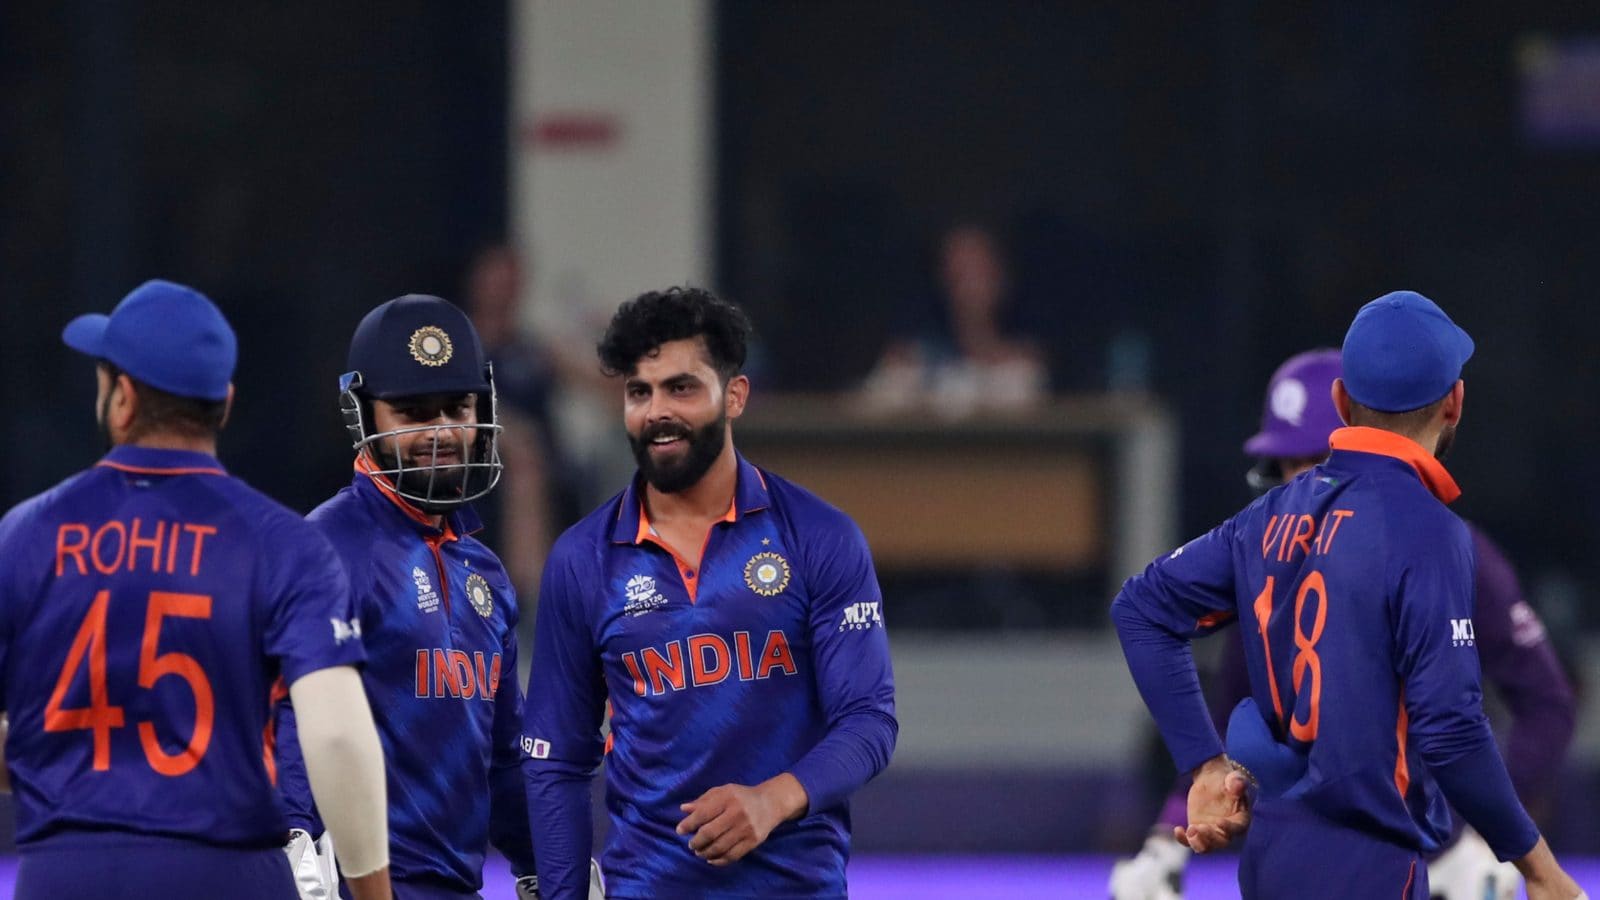 India vs Scotland LIVE Cricket Score, T20 World Cup 2021: India Register  Fastest Team Fifty of The Tournament